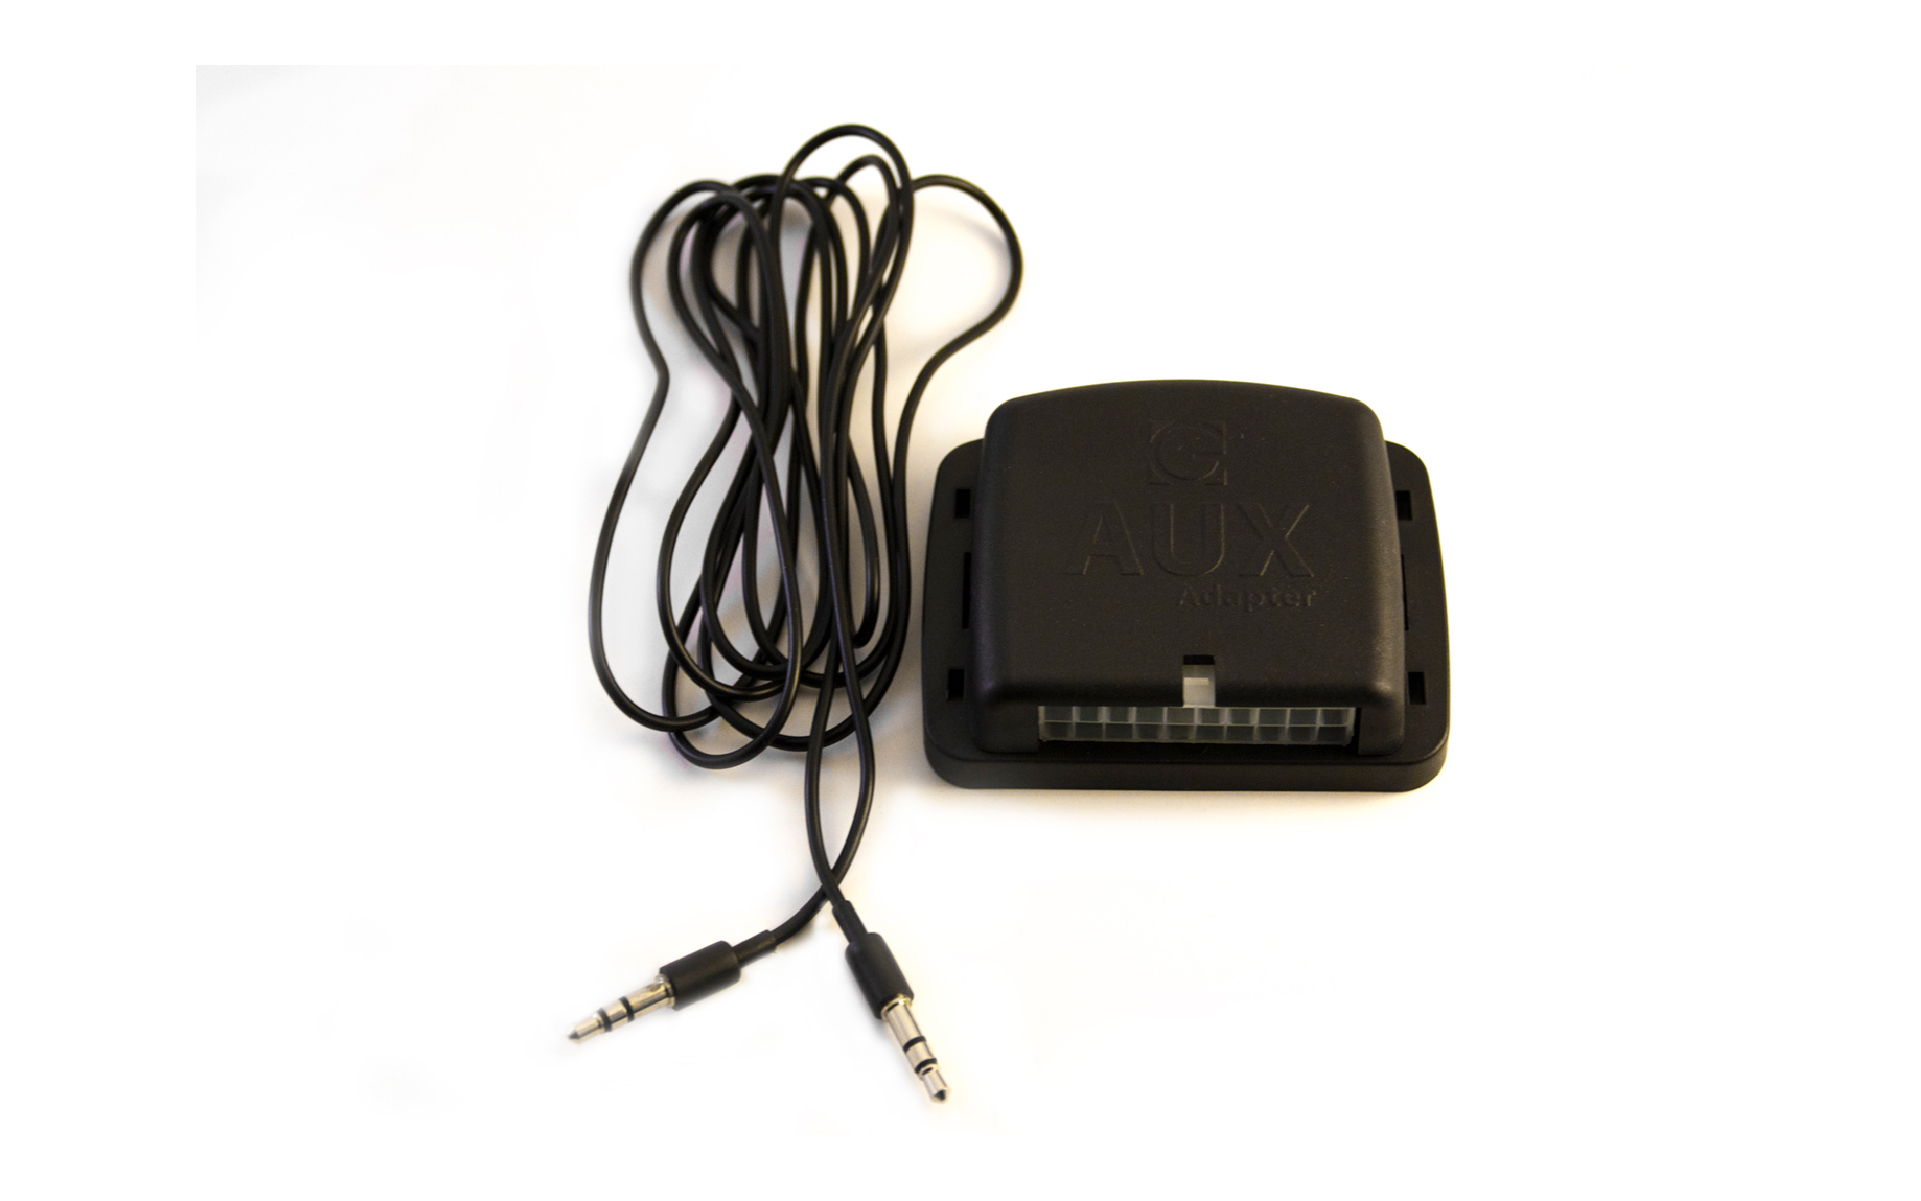 Auxiliary car kit to sync with Android and iPhone